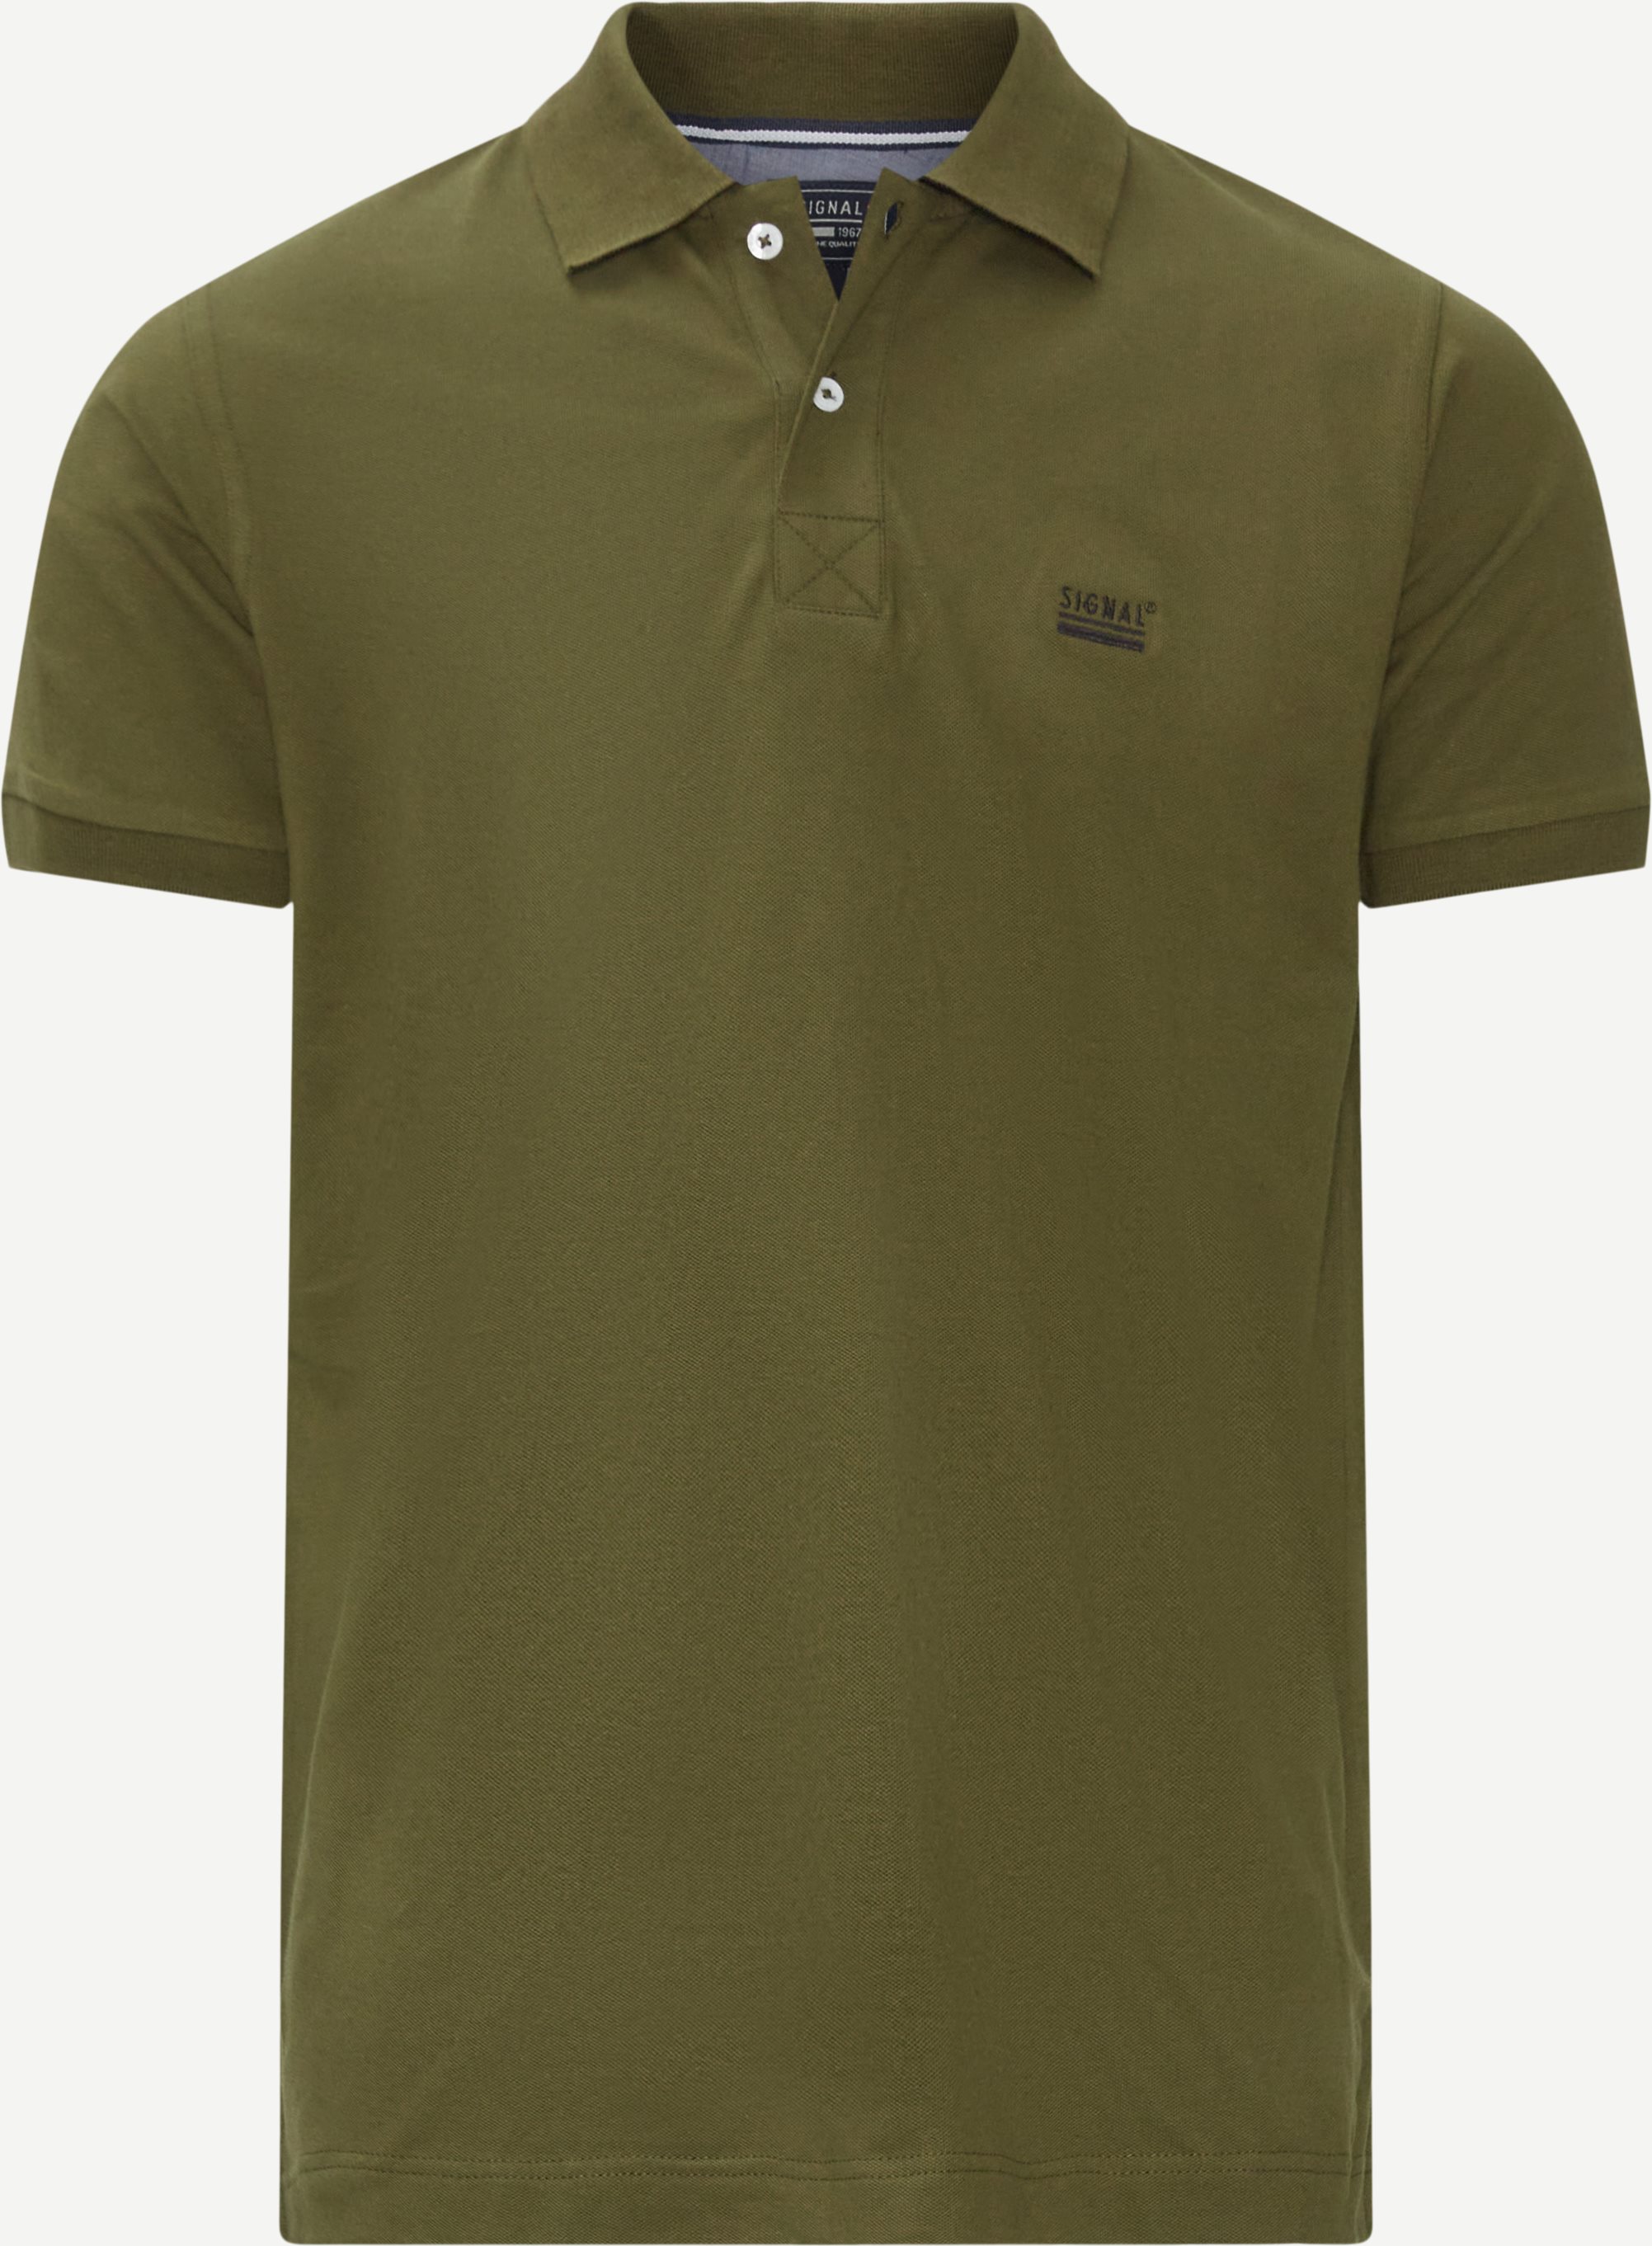 Nors Polo T-shirt - T-shirts - Regular fit - Army